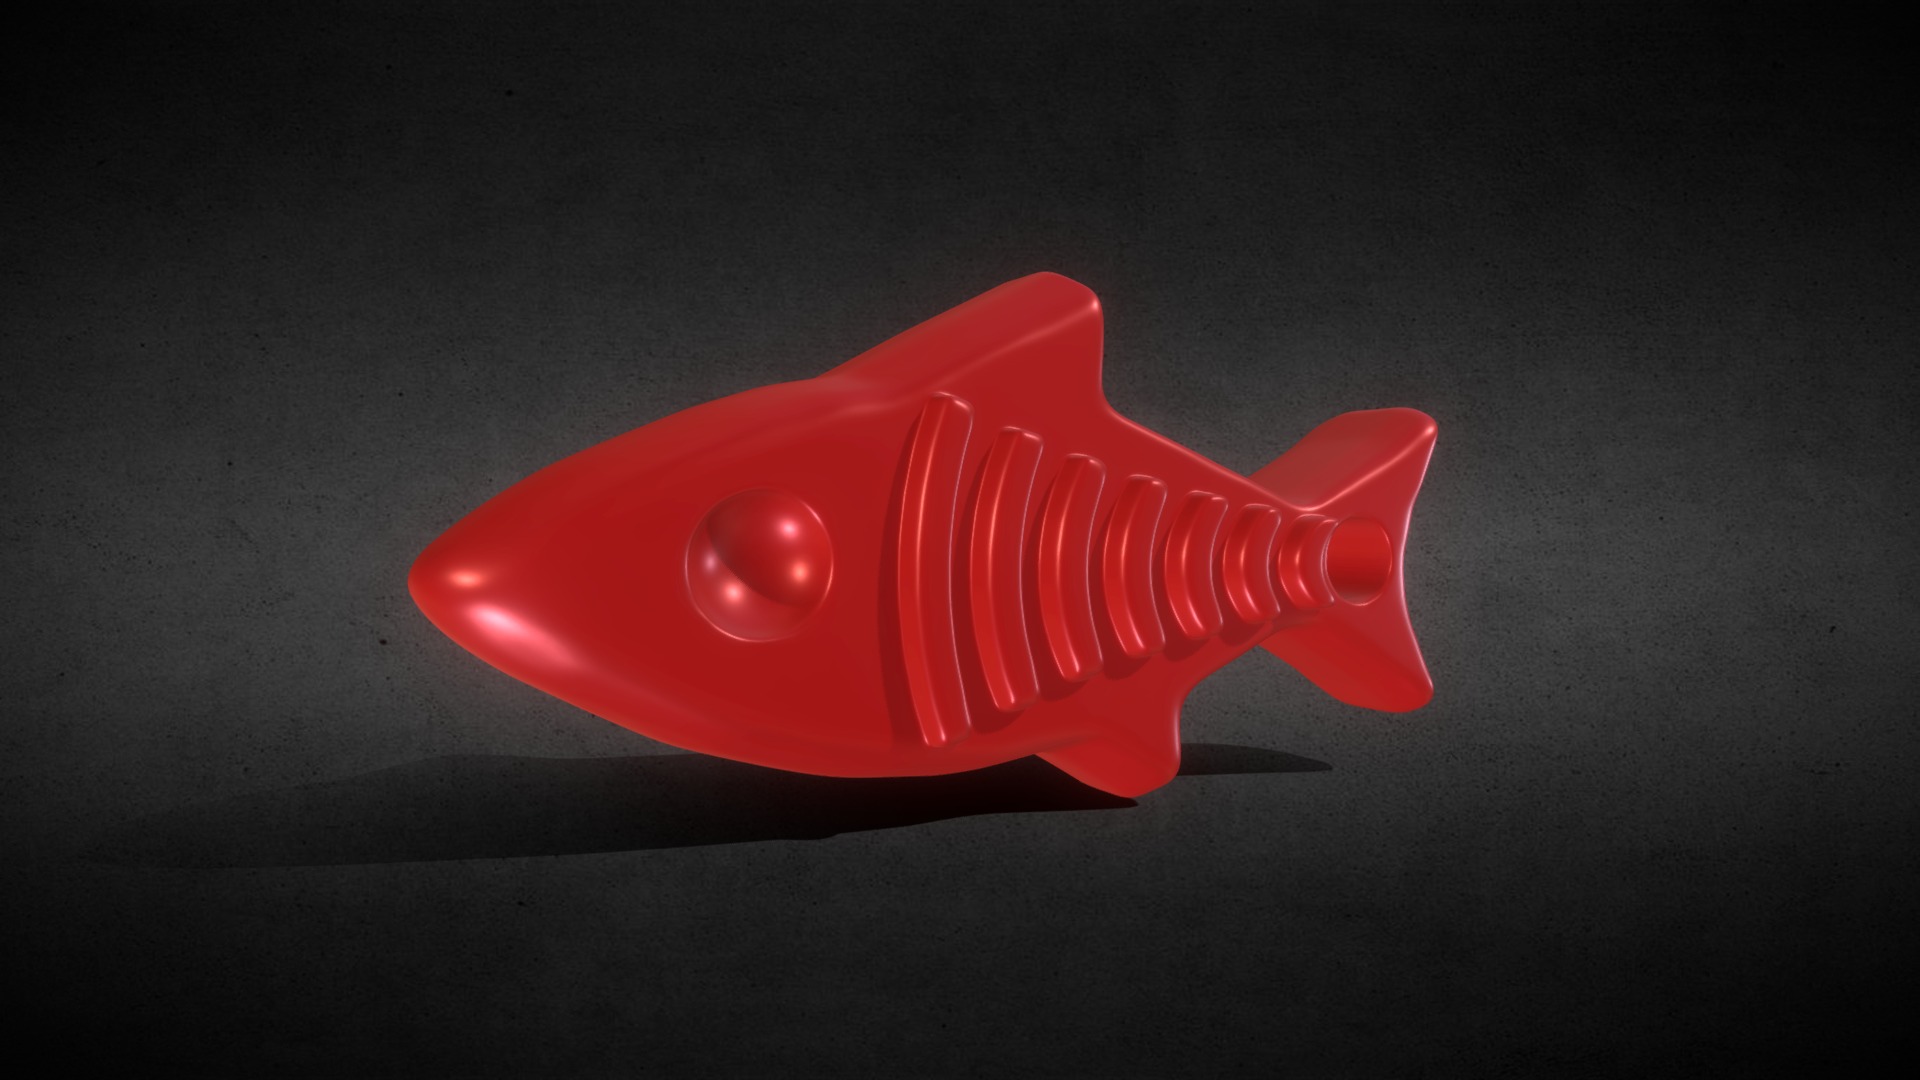 3D model Pet Tag Fish Tag - This is a 3D model of the Pet Tag Fish Tag. The 3D model is about a red plastic toy.